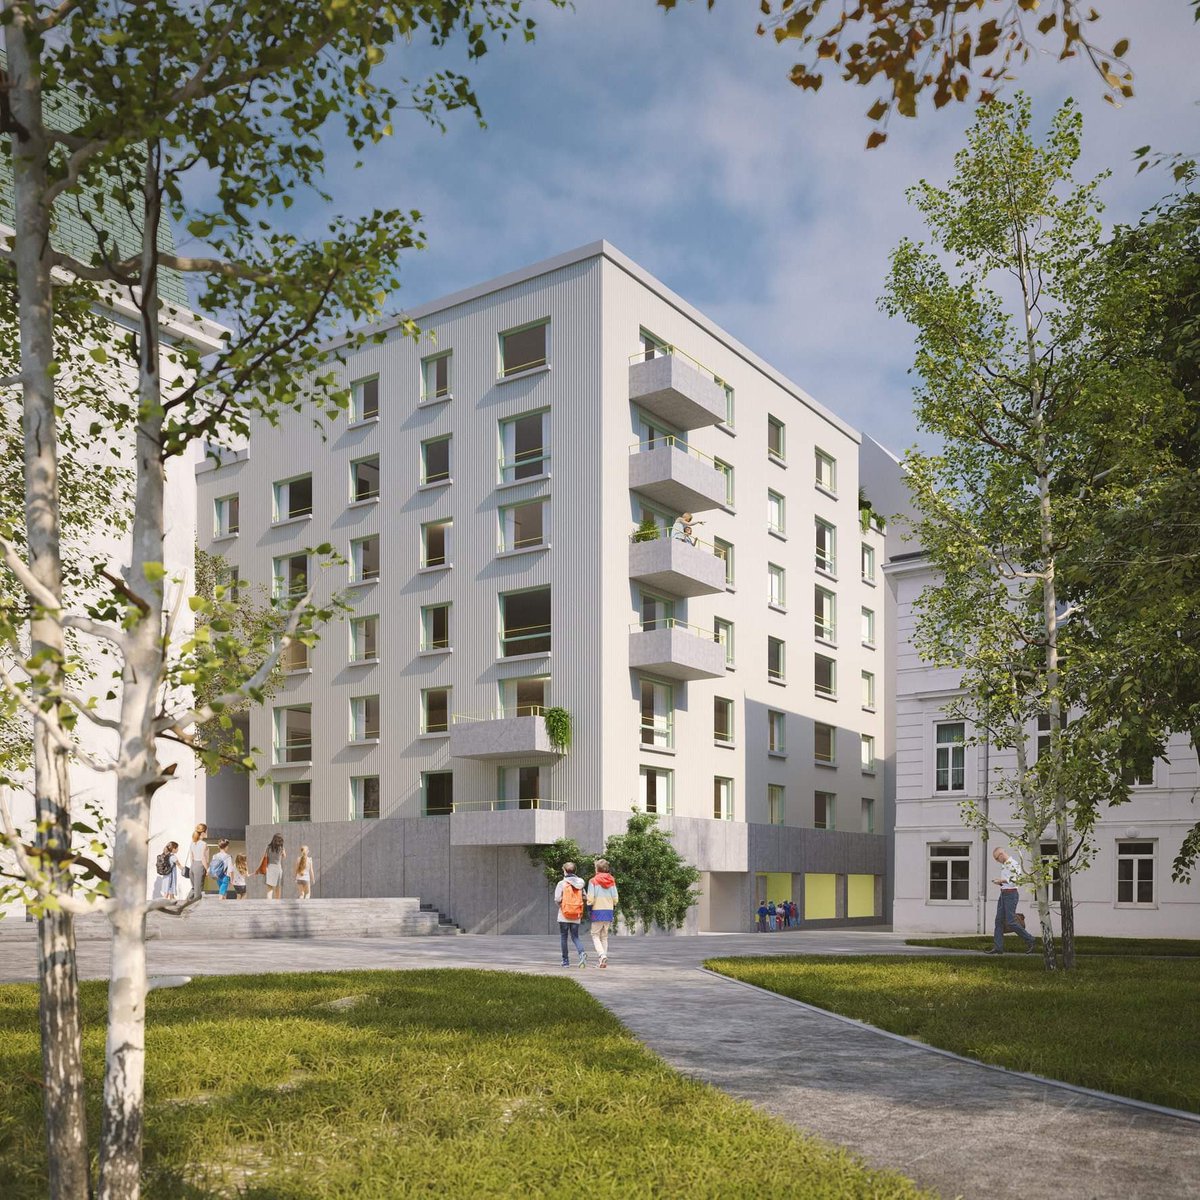 i've been asked a number of times why the median new social housing project in vienna costs so much lower than cities like seattle or SFO. anyone want to take a stab? median new social housing building in vienna looks a bit like this.